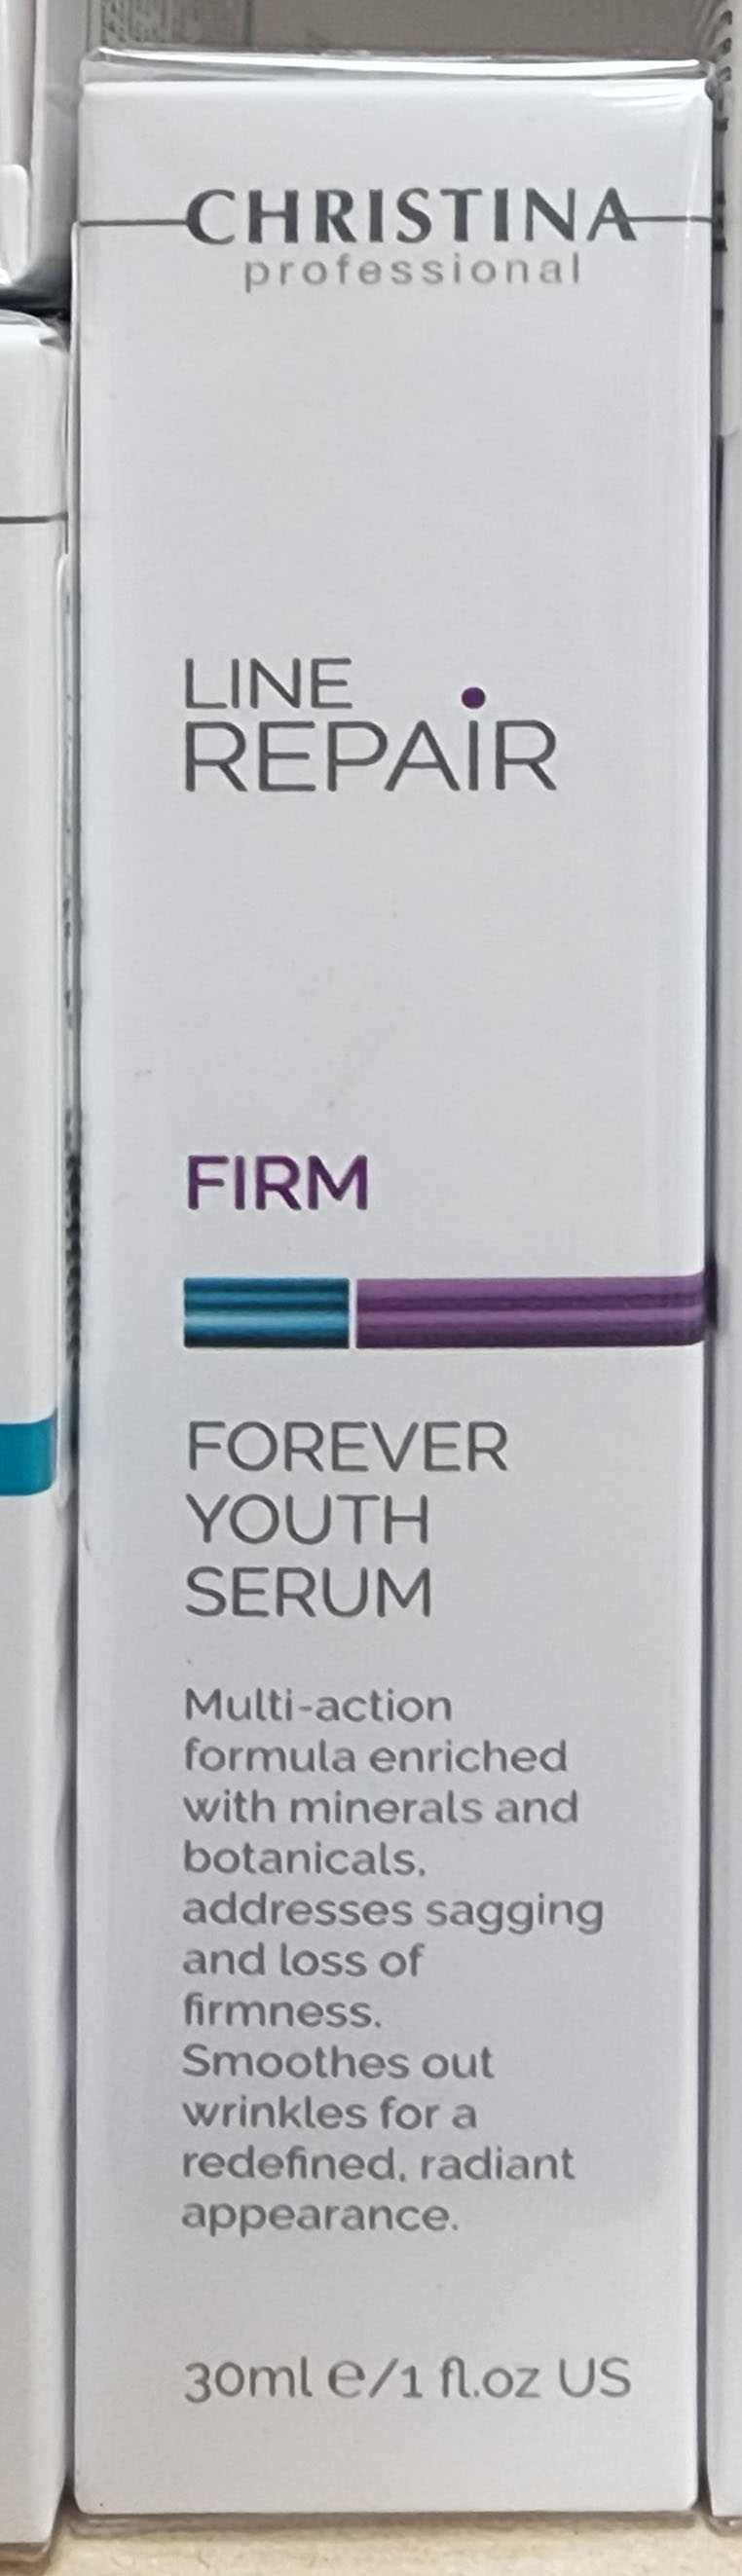 Christina Line Repair - Firm - Forever Youth Serum 30ml